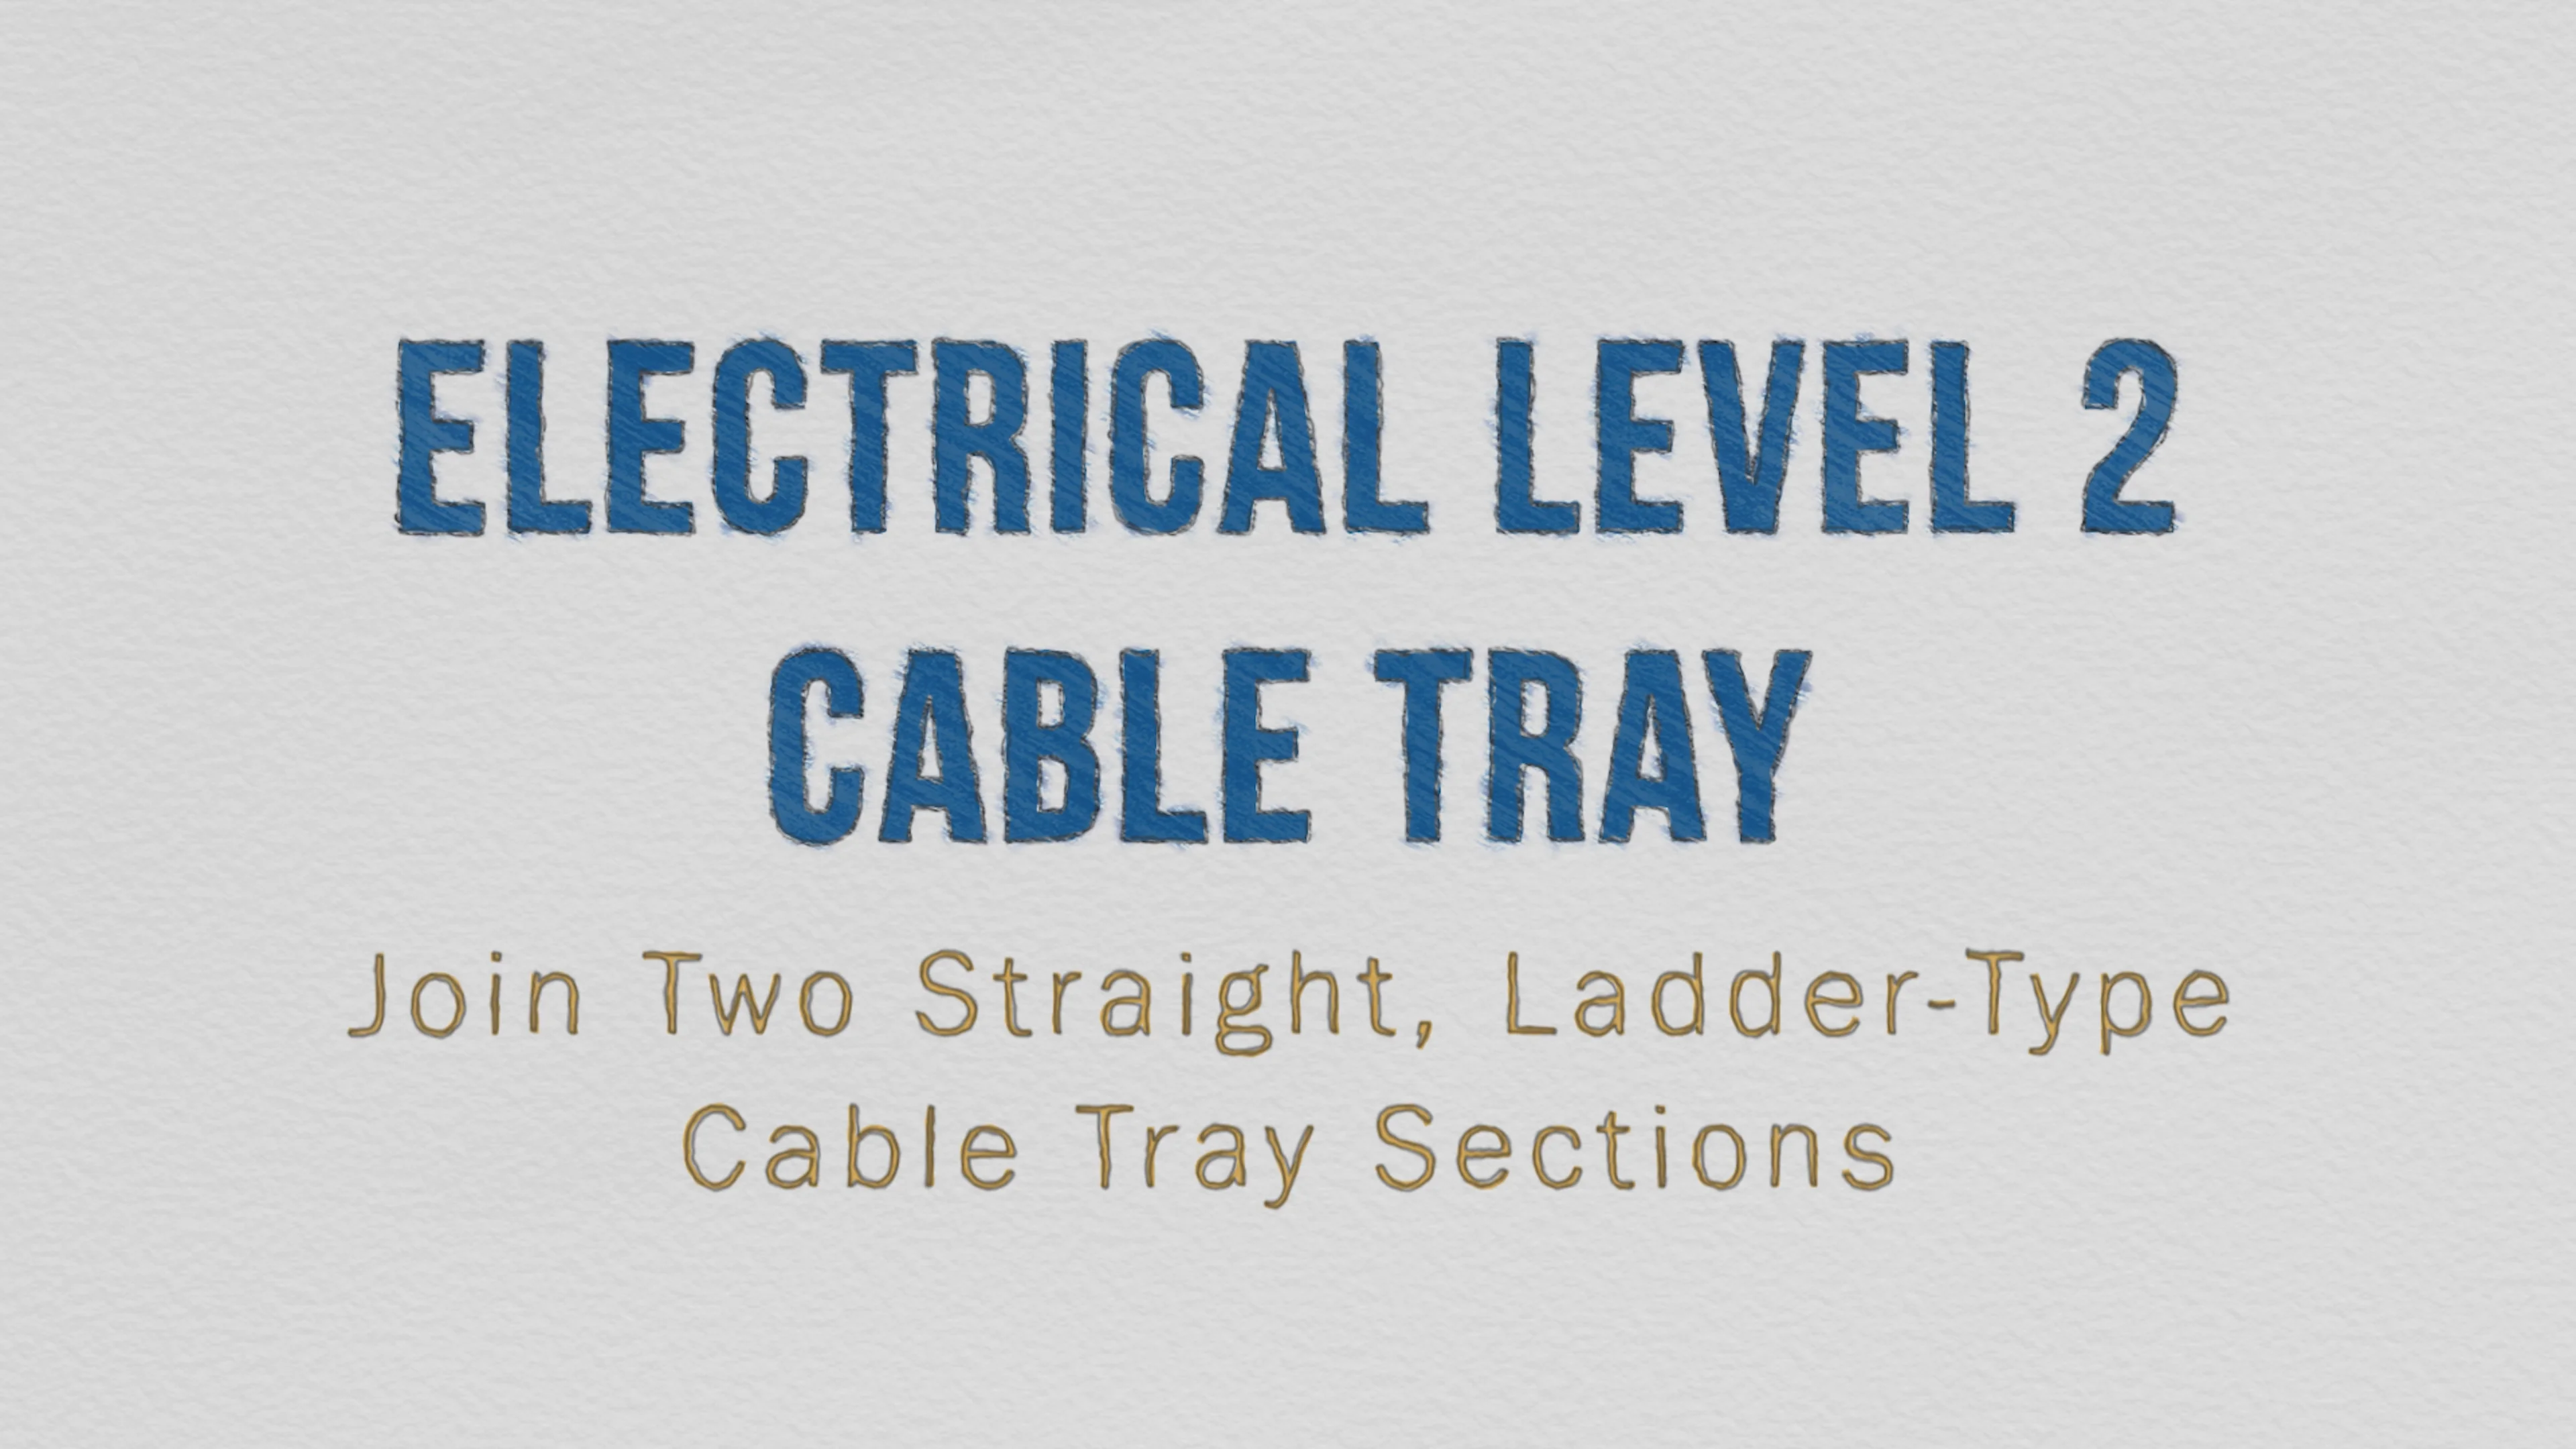 Join Two Straight, Ladder-Type Cable Tray Sections Together on Vimeo